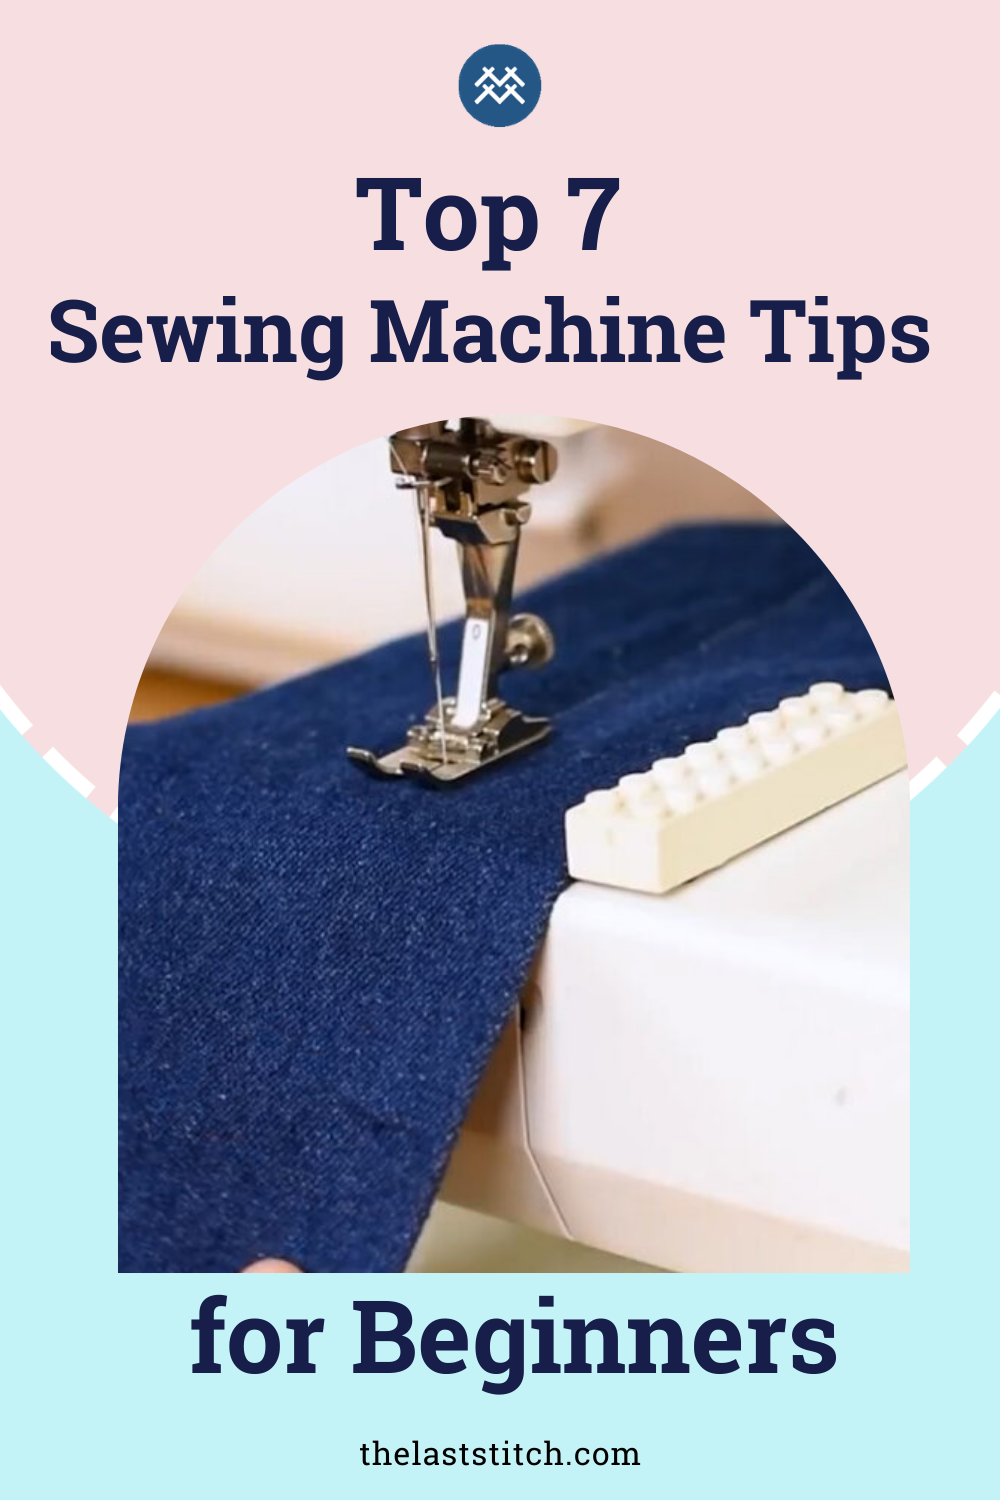 Top 7 Sewing Machine Tips for Beginners - The Last Stitch